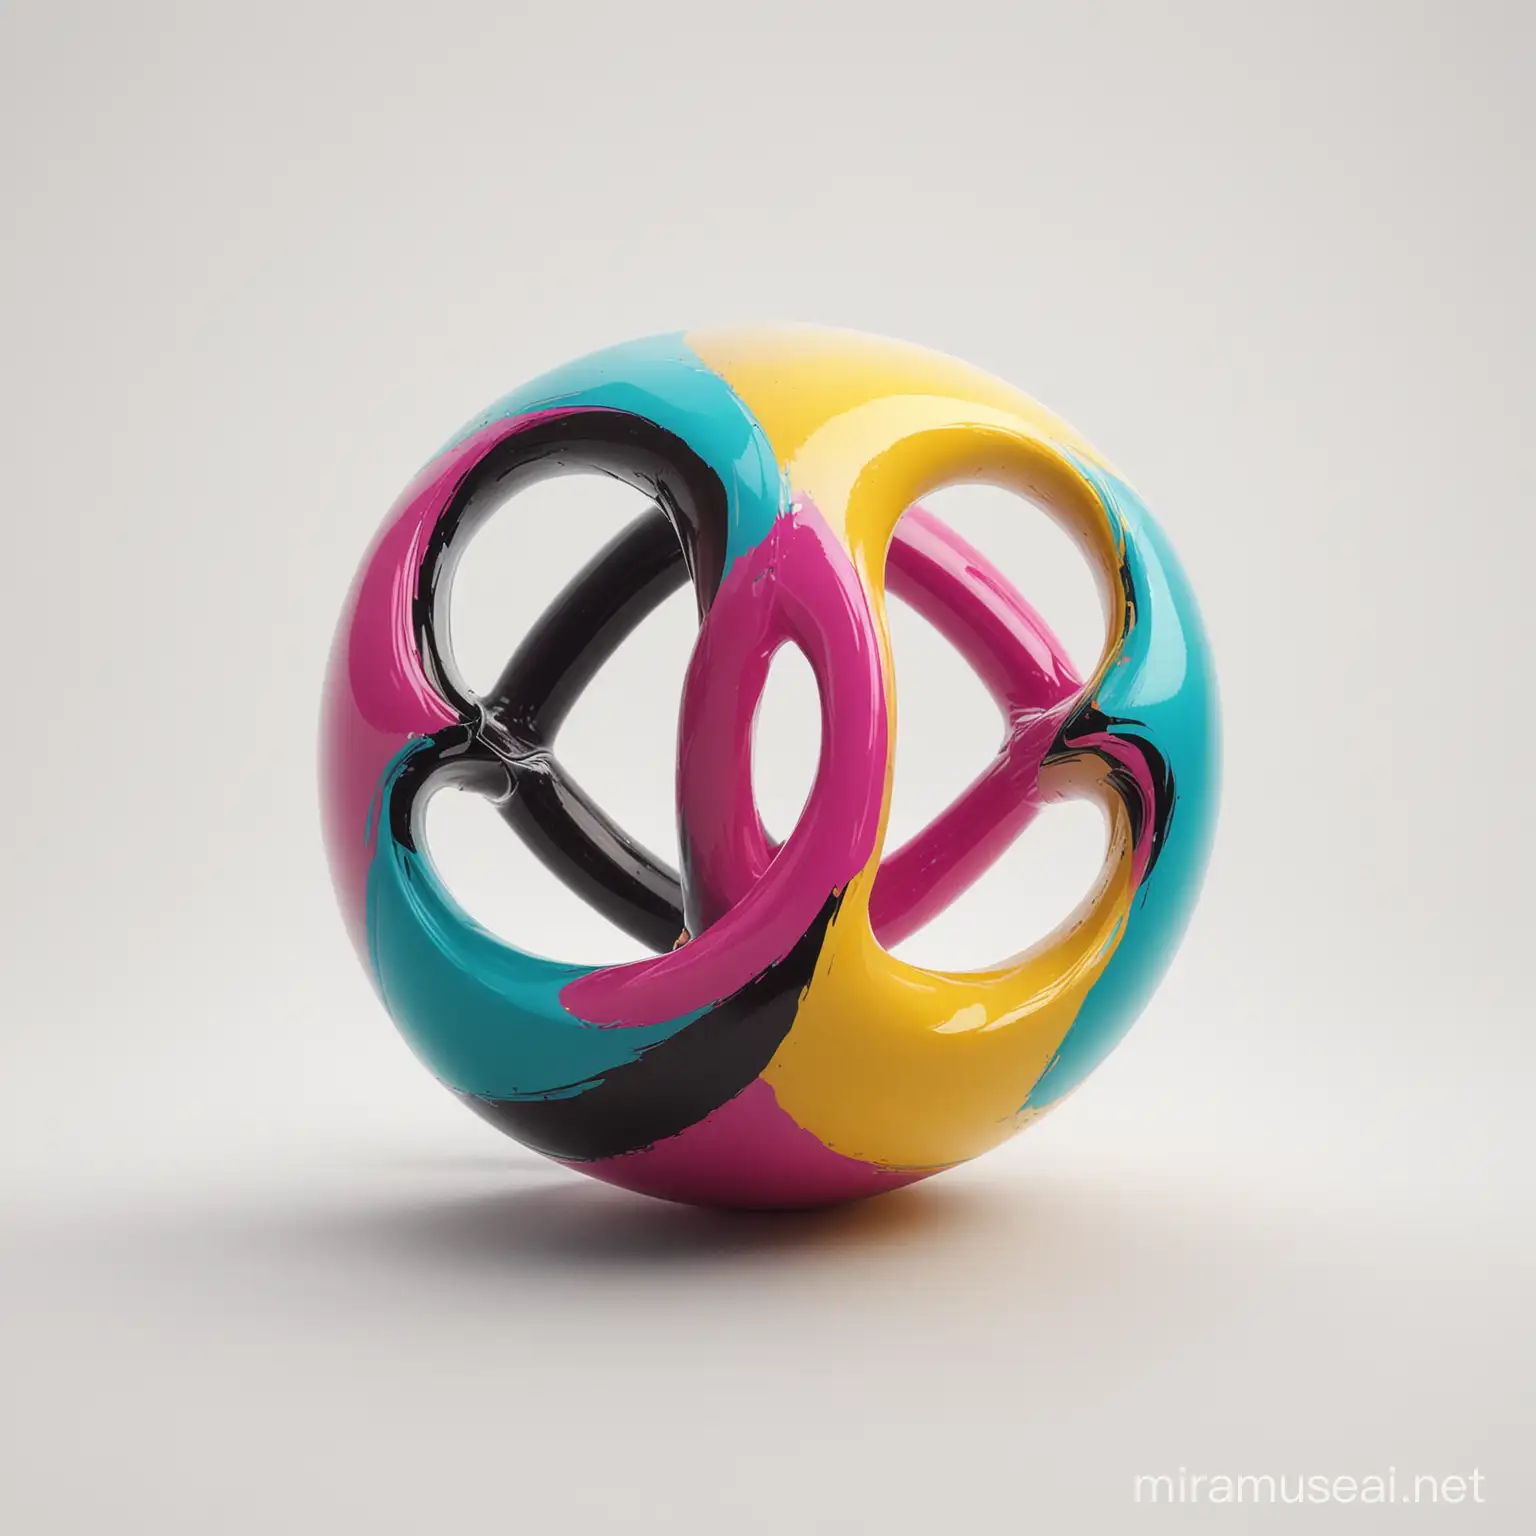 Make a brand logo made of a möbius band using strictly the CMYK colours (Cyan, Magenta, Yellow, and black) on a white background.